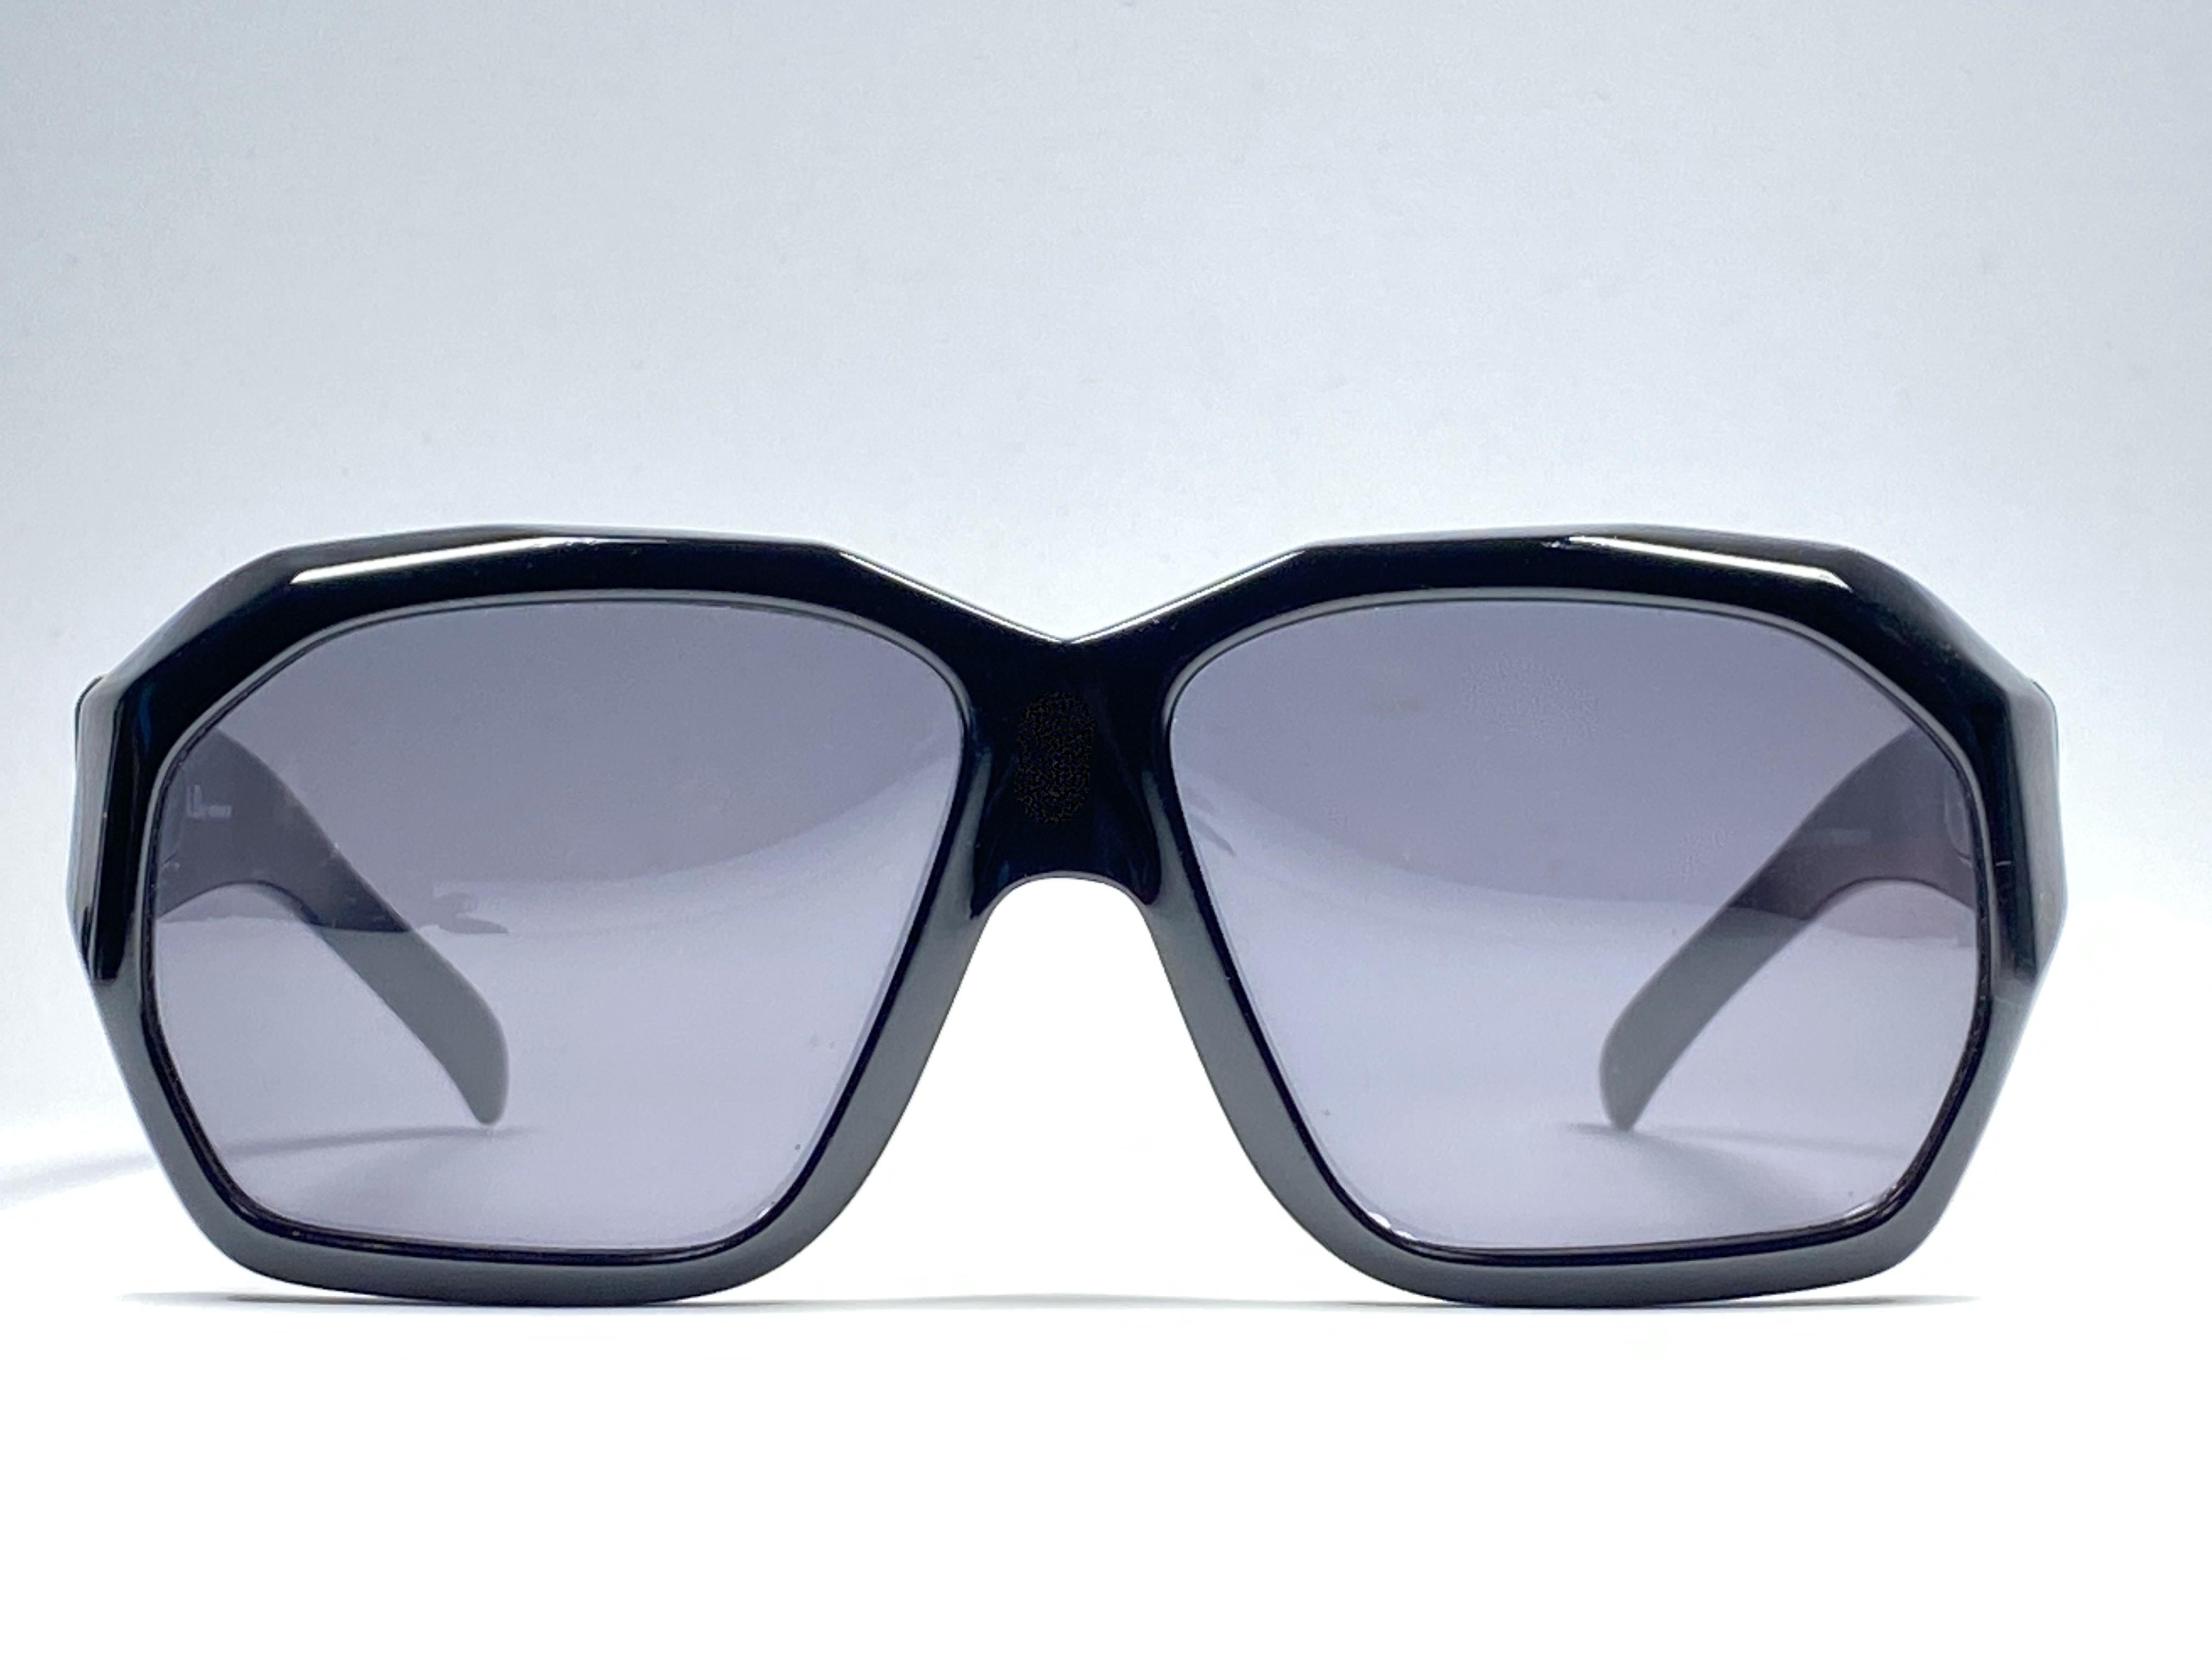 
New Vintage Christian Dior 2466 91 Sunglasses Super Oversized sleek black frame with spotless deep grey lenses. Design and produced in 1970’s. 

Made by Optyl. 

Manufactured in Germany.

This item could show  minor sign of wear due to